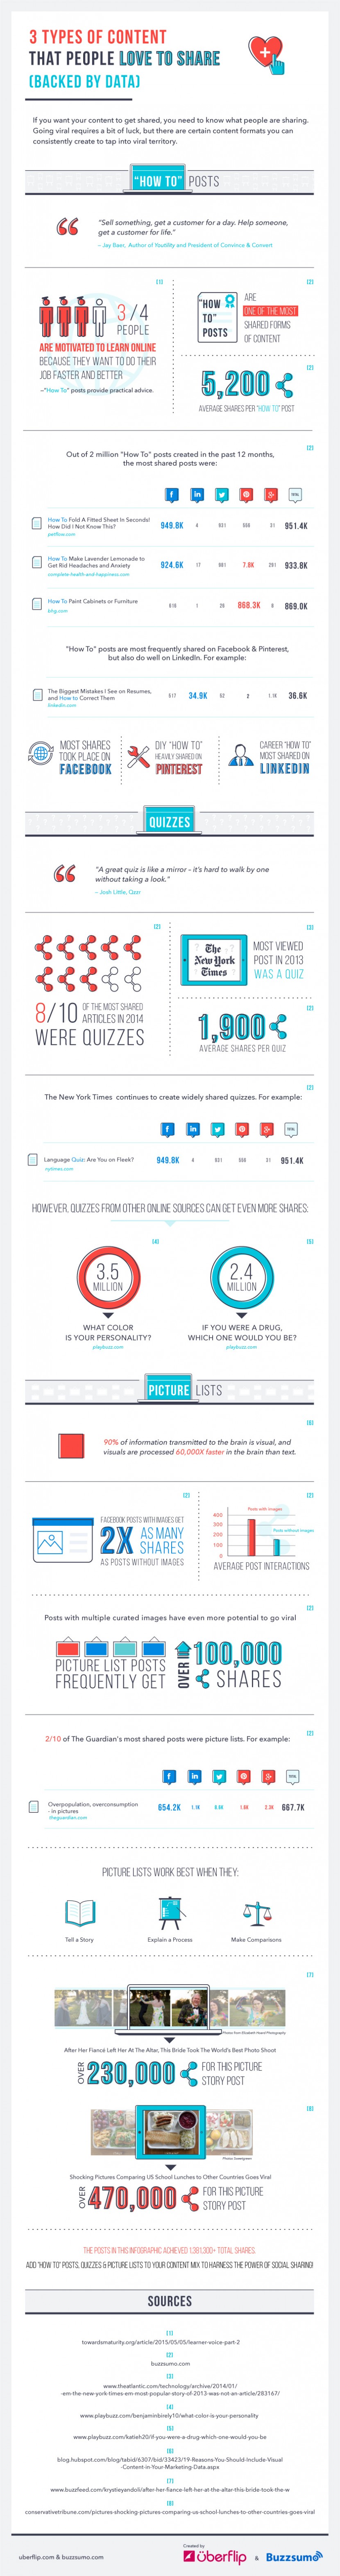 Infographie 208 - what preferred content